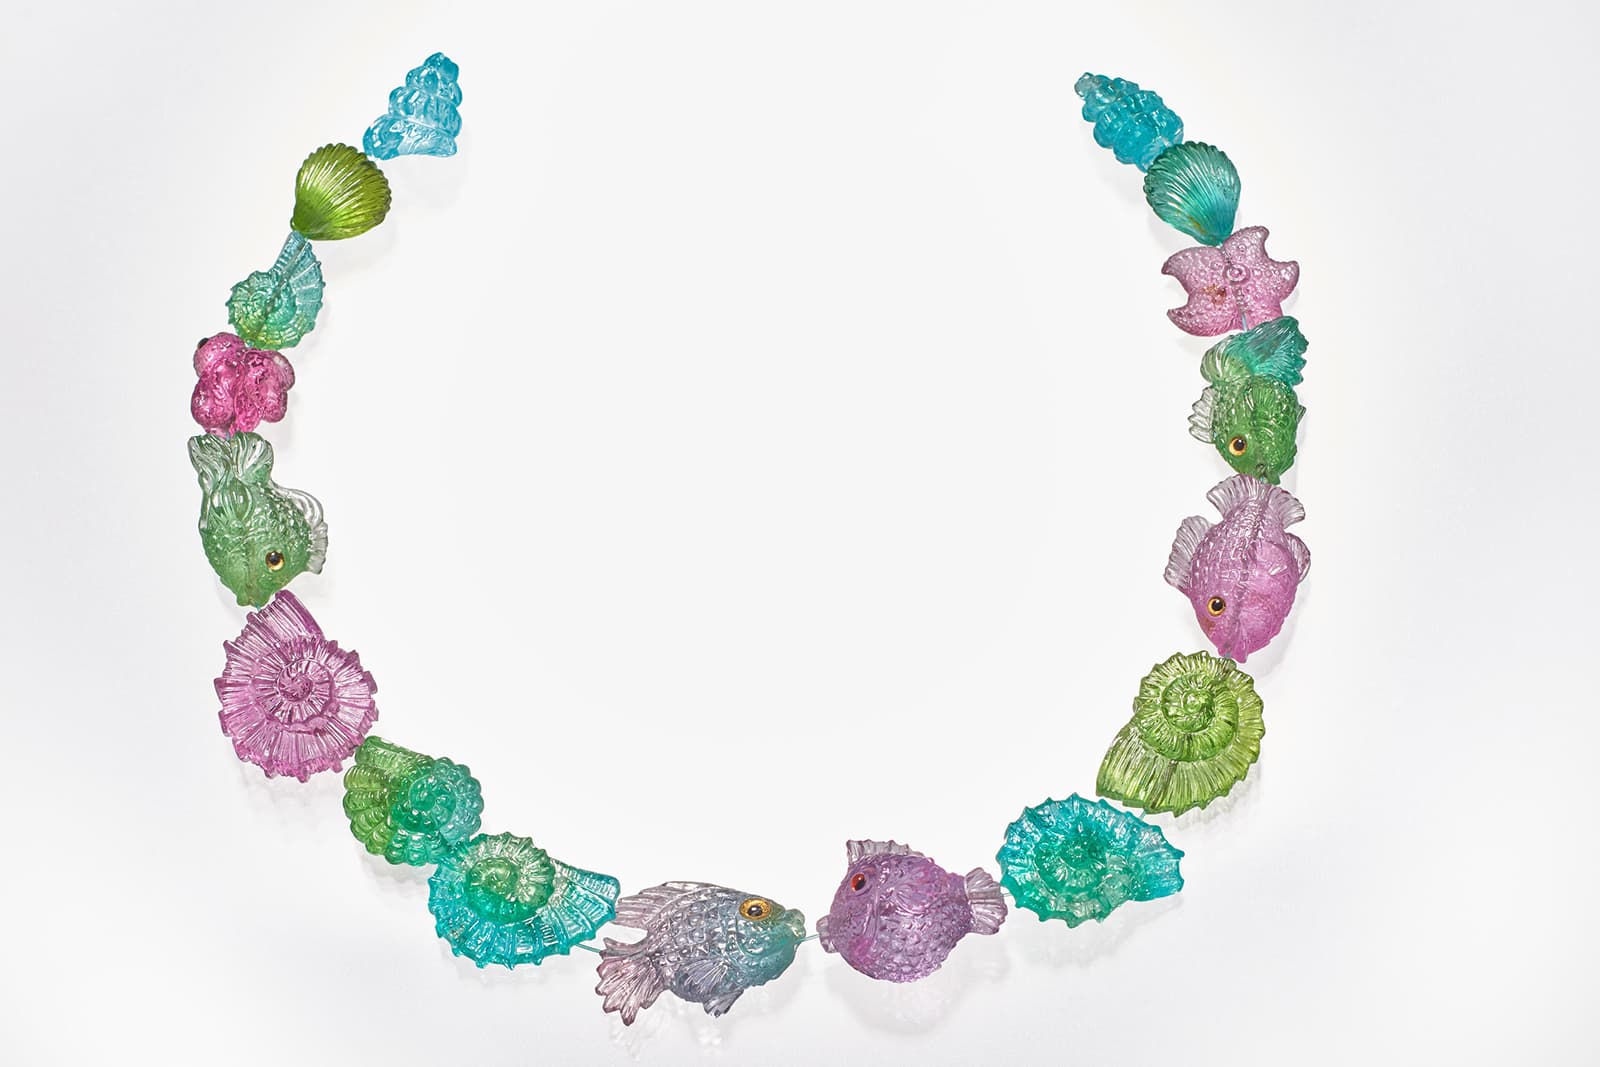 A fish and seashell inspired carved gemstone necklace layout by Paul Wild, including Paraiba tourmaline